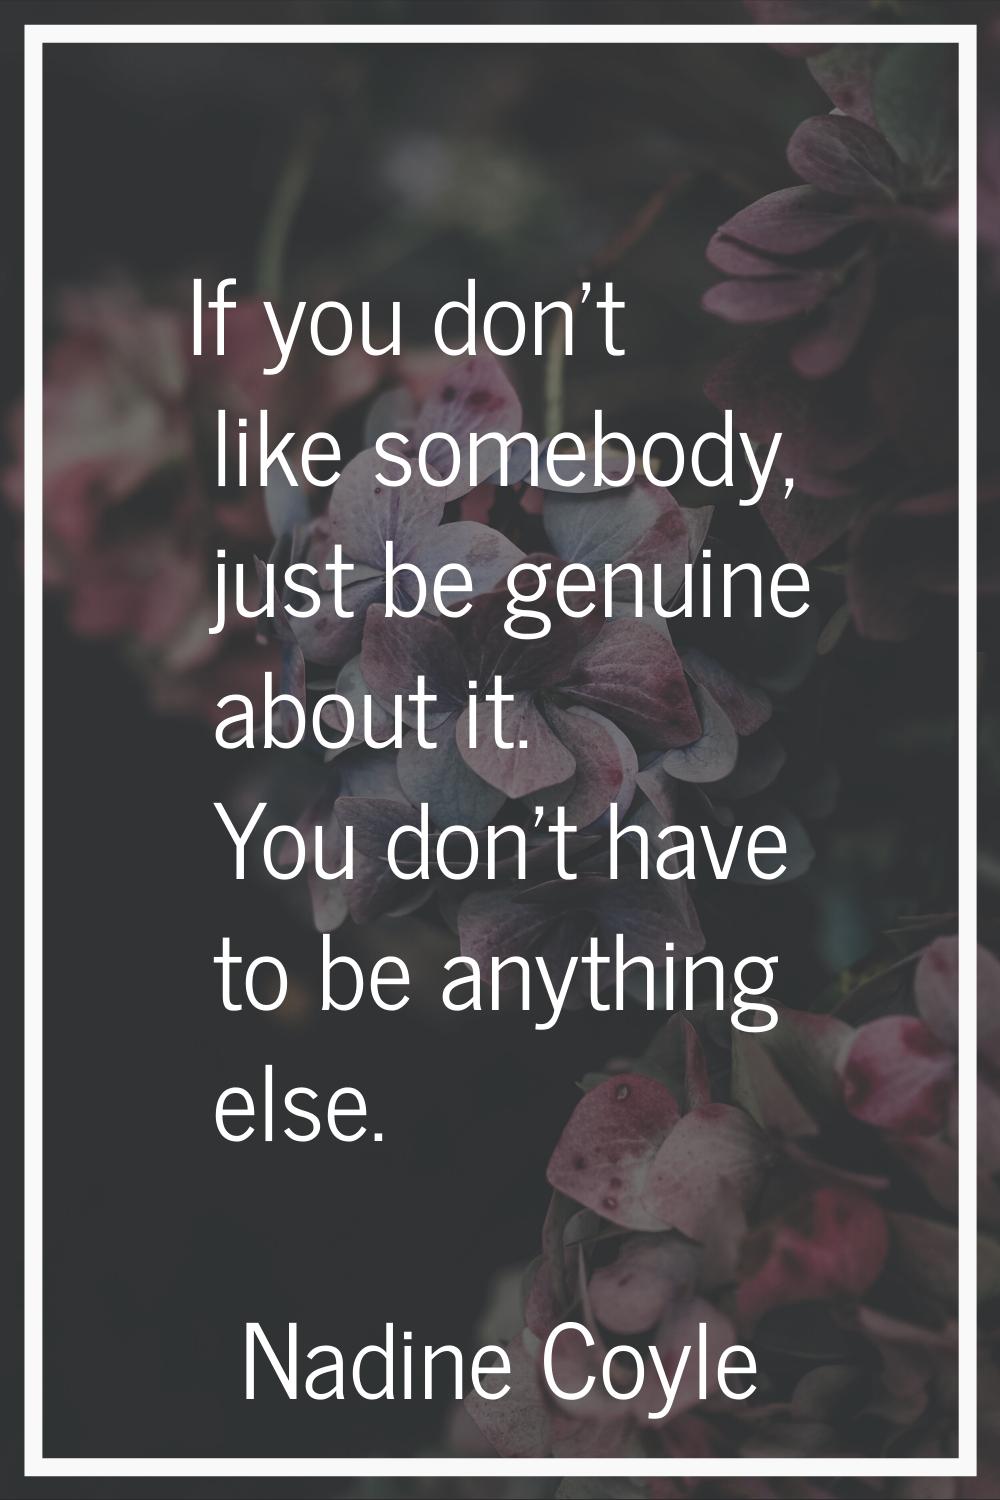 If you don't like somebody, just be genuine about it. You don't have to be anything else.